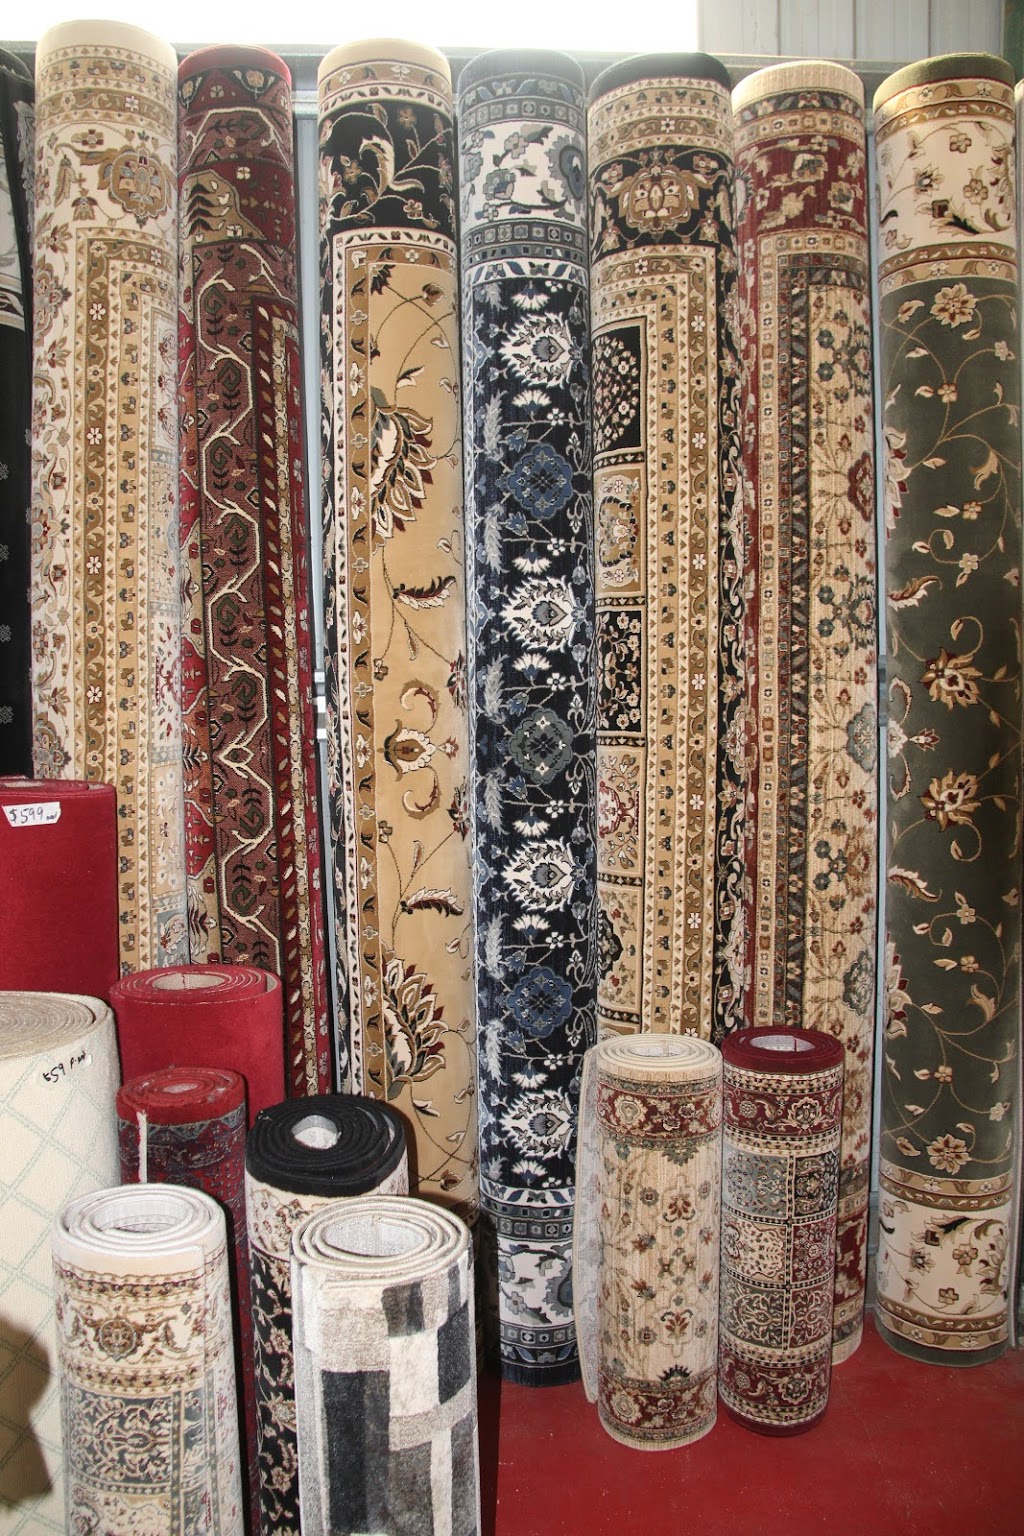 Red Door carpets, Rugs and Mats Warehouse | home goods store | 424 Sutton St, Ballarat Central VIC 3356, Australia | 0353355567 OR +61 3 5335 5567